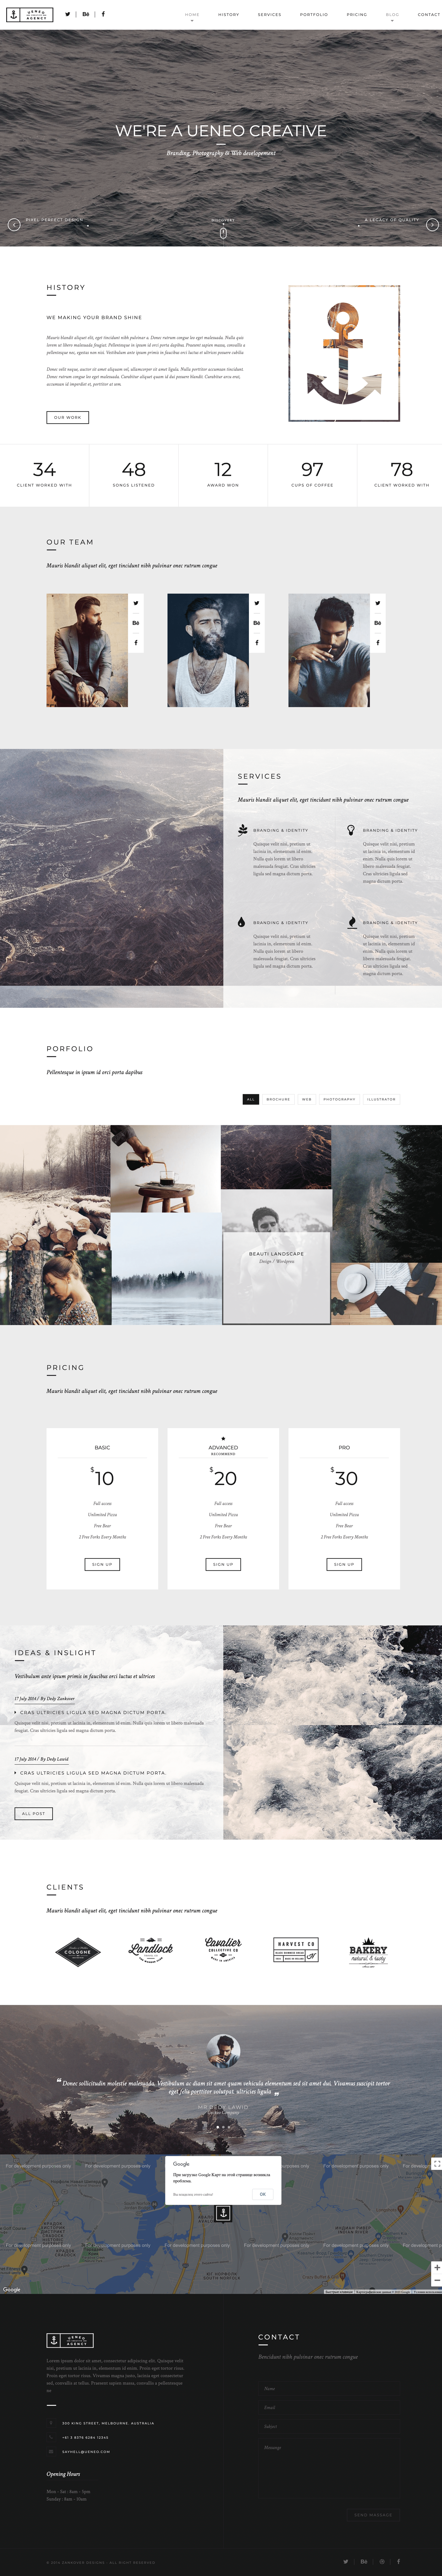 Professional HTML Template for Web Studio Simplicity and Beauty in One